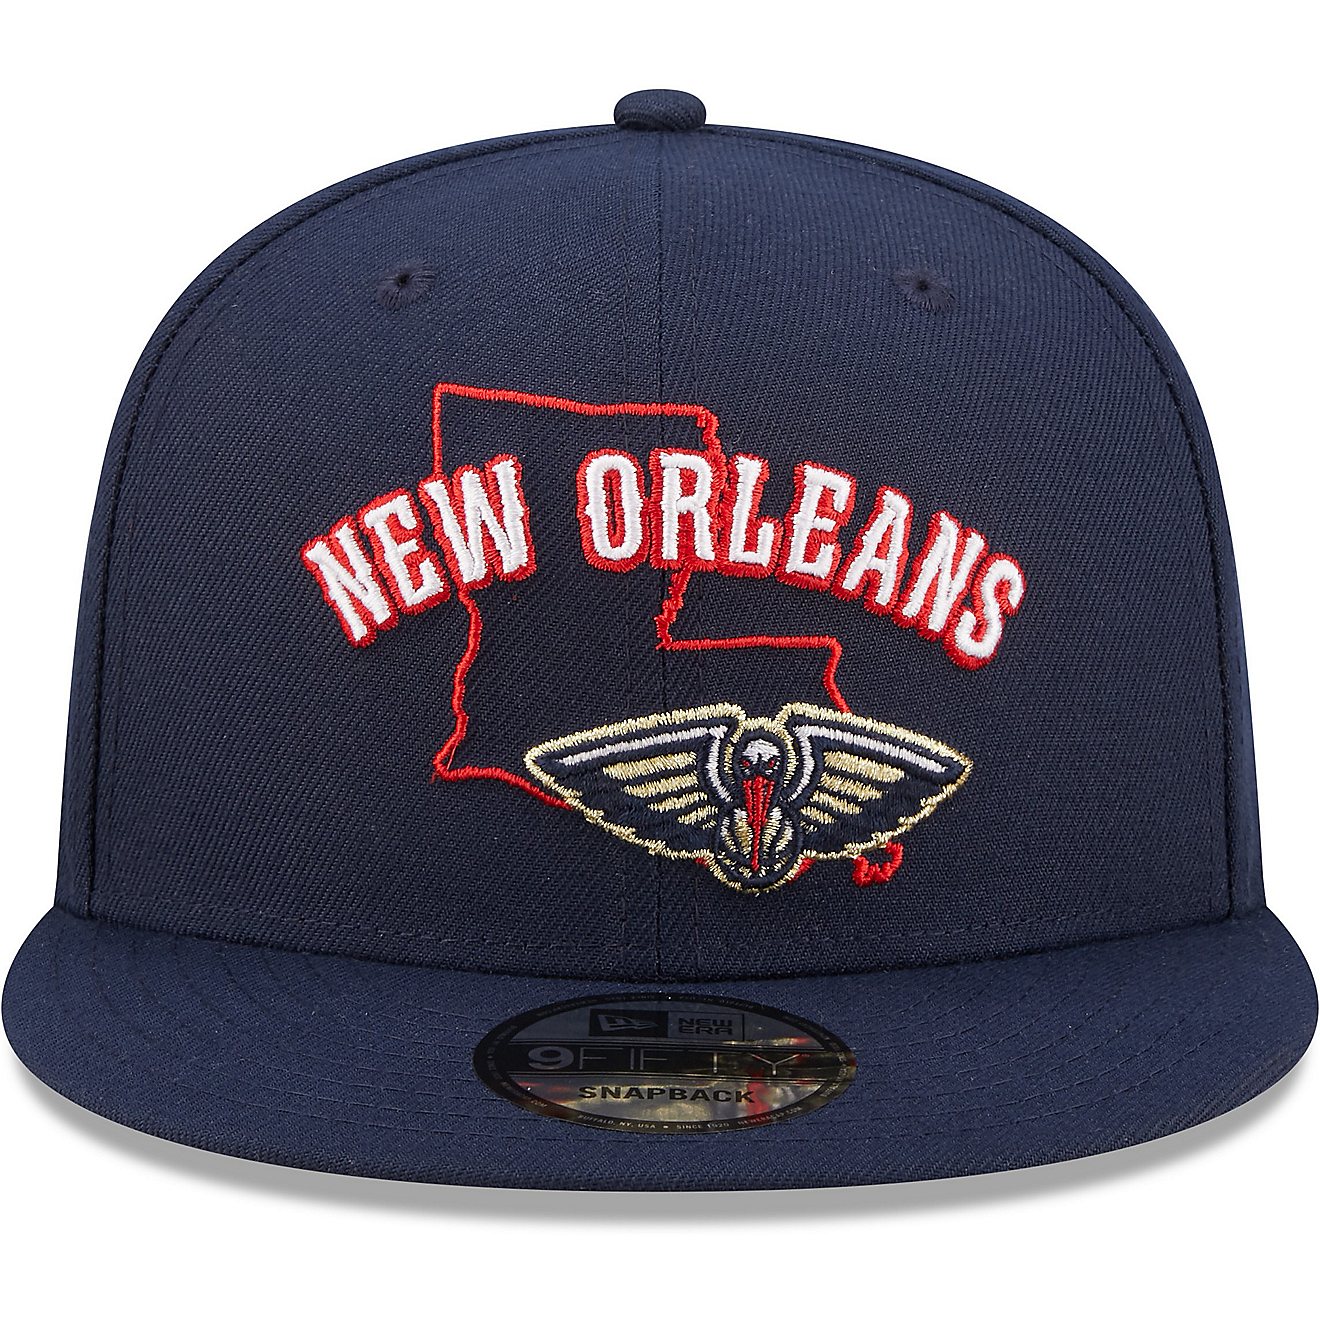 New Era Men's New Orleans Pelicans Logo State 9FIFTY Cap                                                                         - view number 2